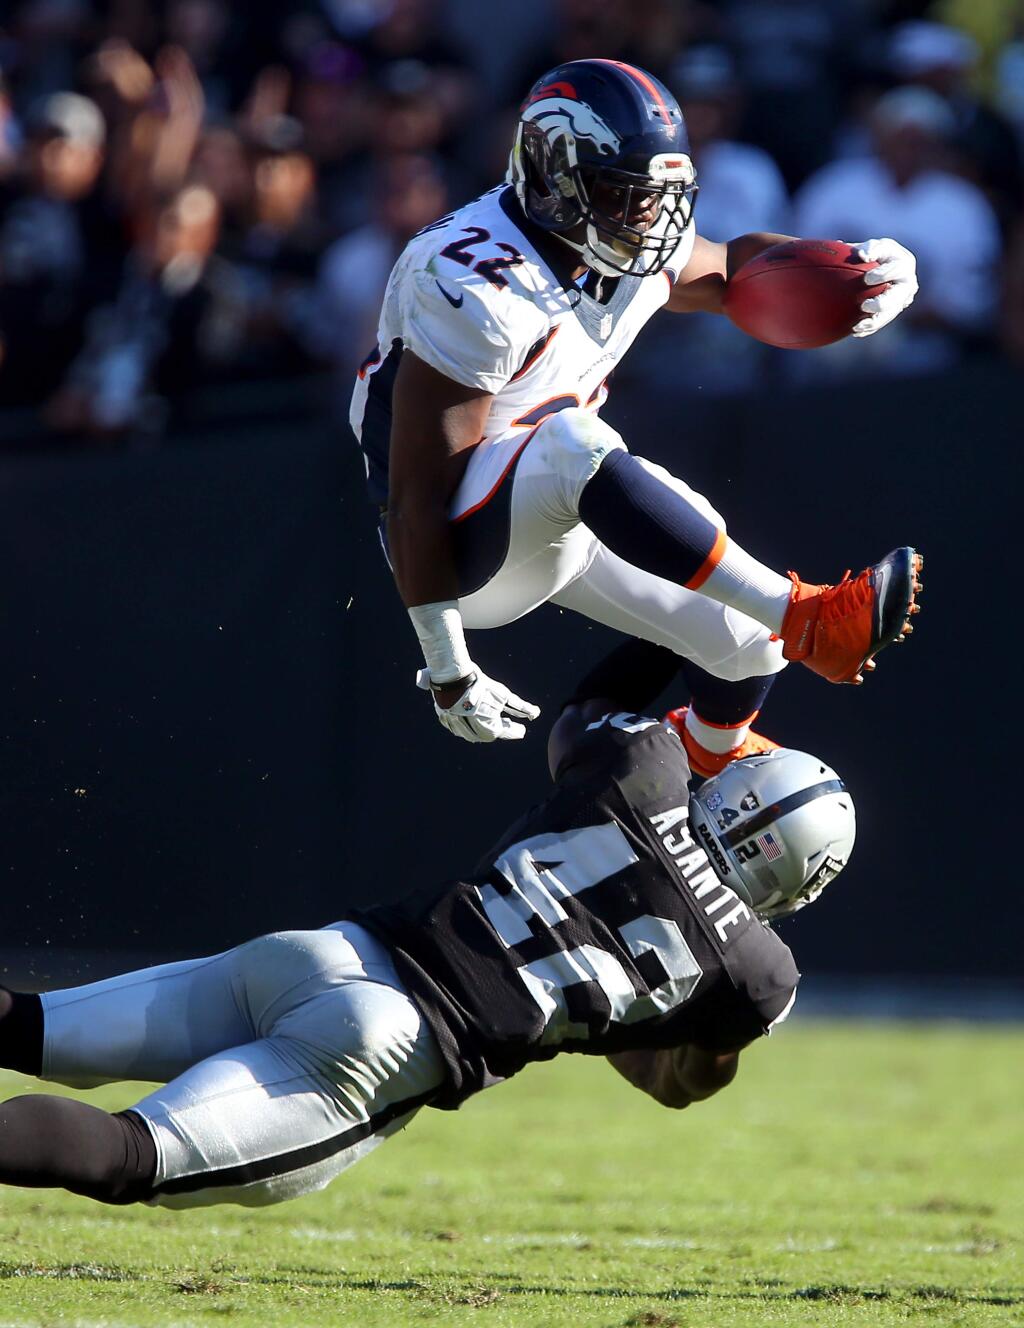 Denver Broncos running back C.J. Anderson hurdles Oakland Raiders safety Larry Asante for a first down during the second quarter of their game in Oakland on Sunday, November 9, 2014. The Broncos defeated the Raiders 41-17.(Christopher Chung/ The Press Democrat)